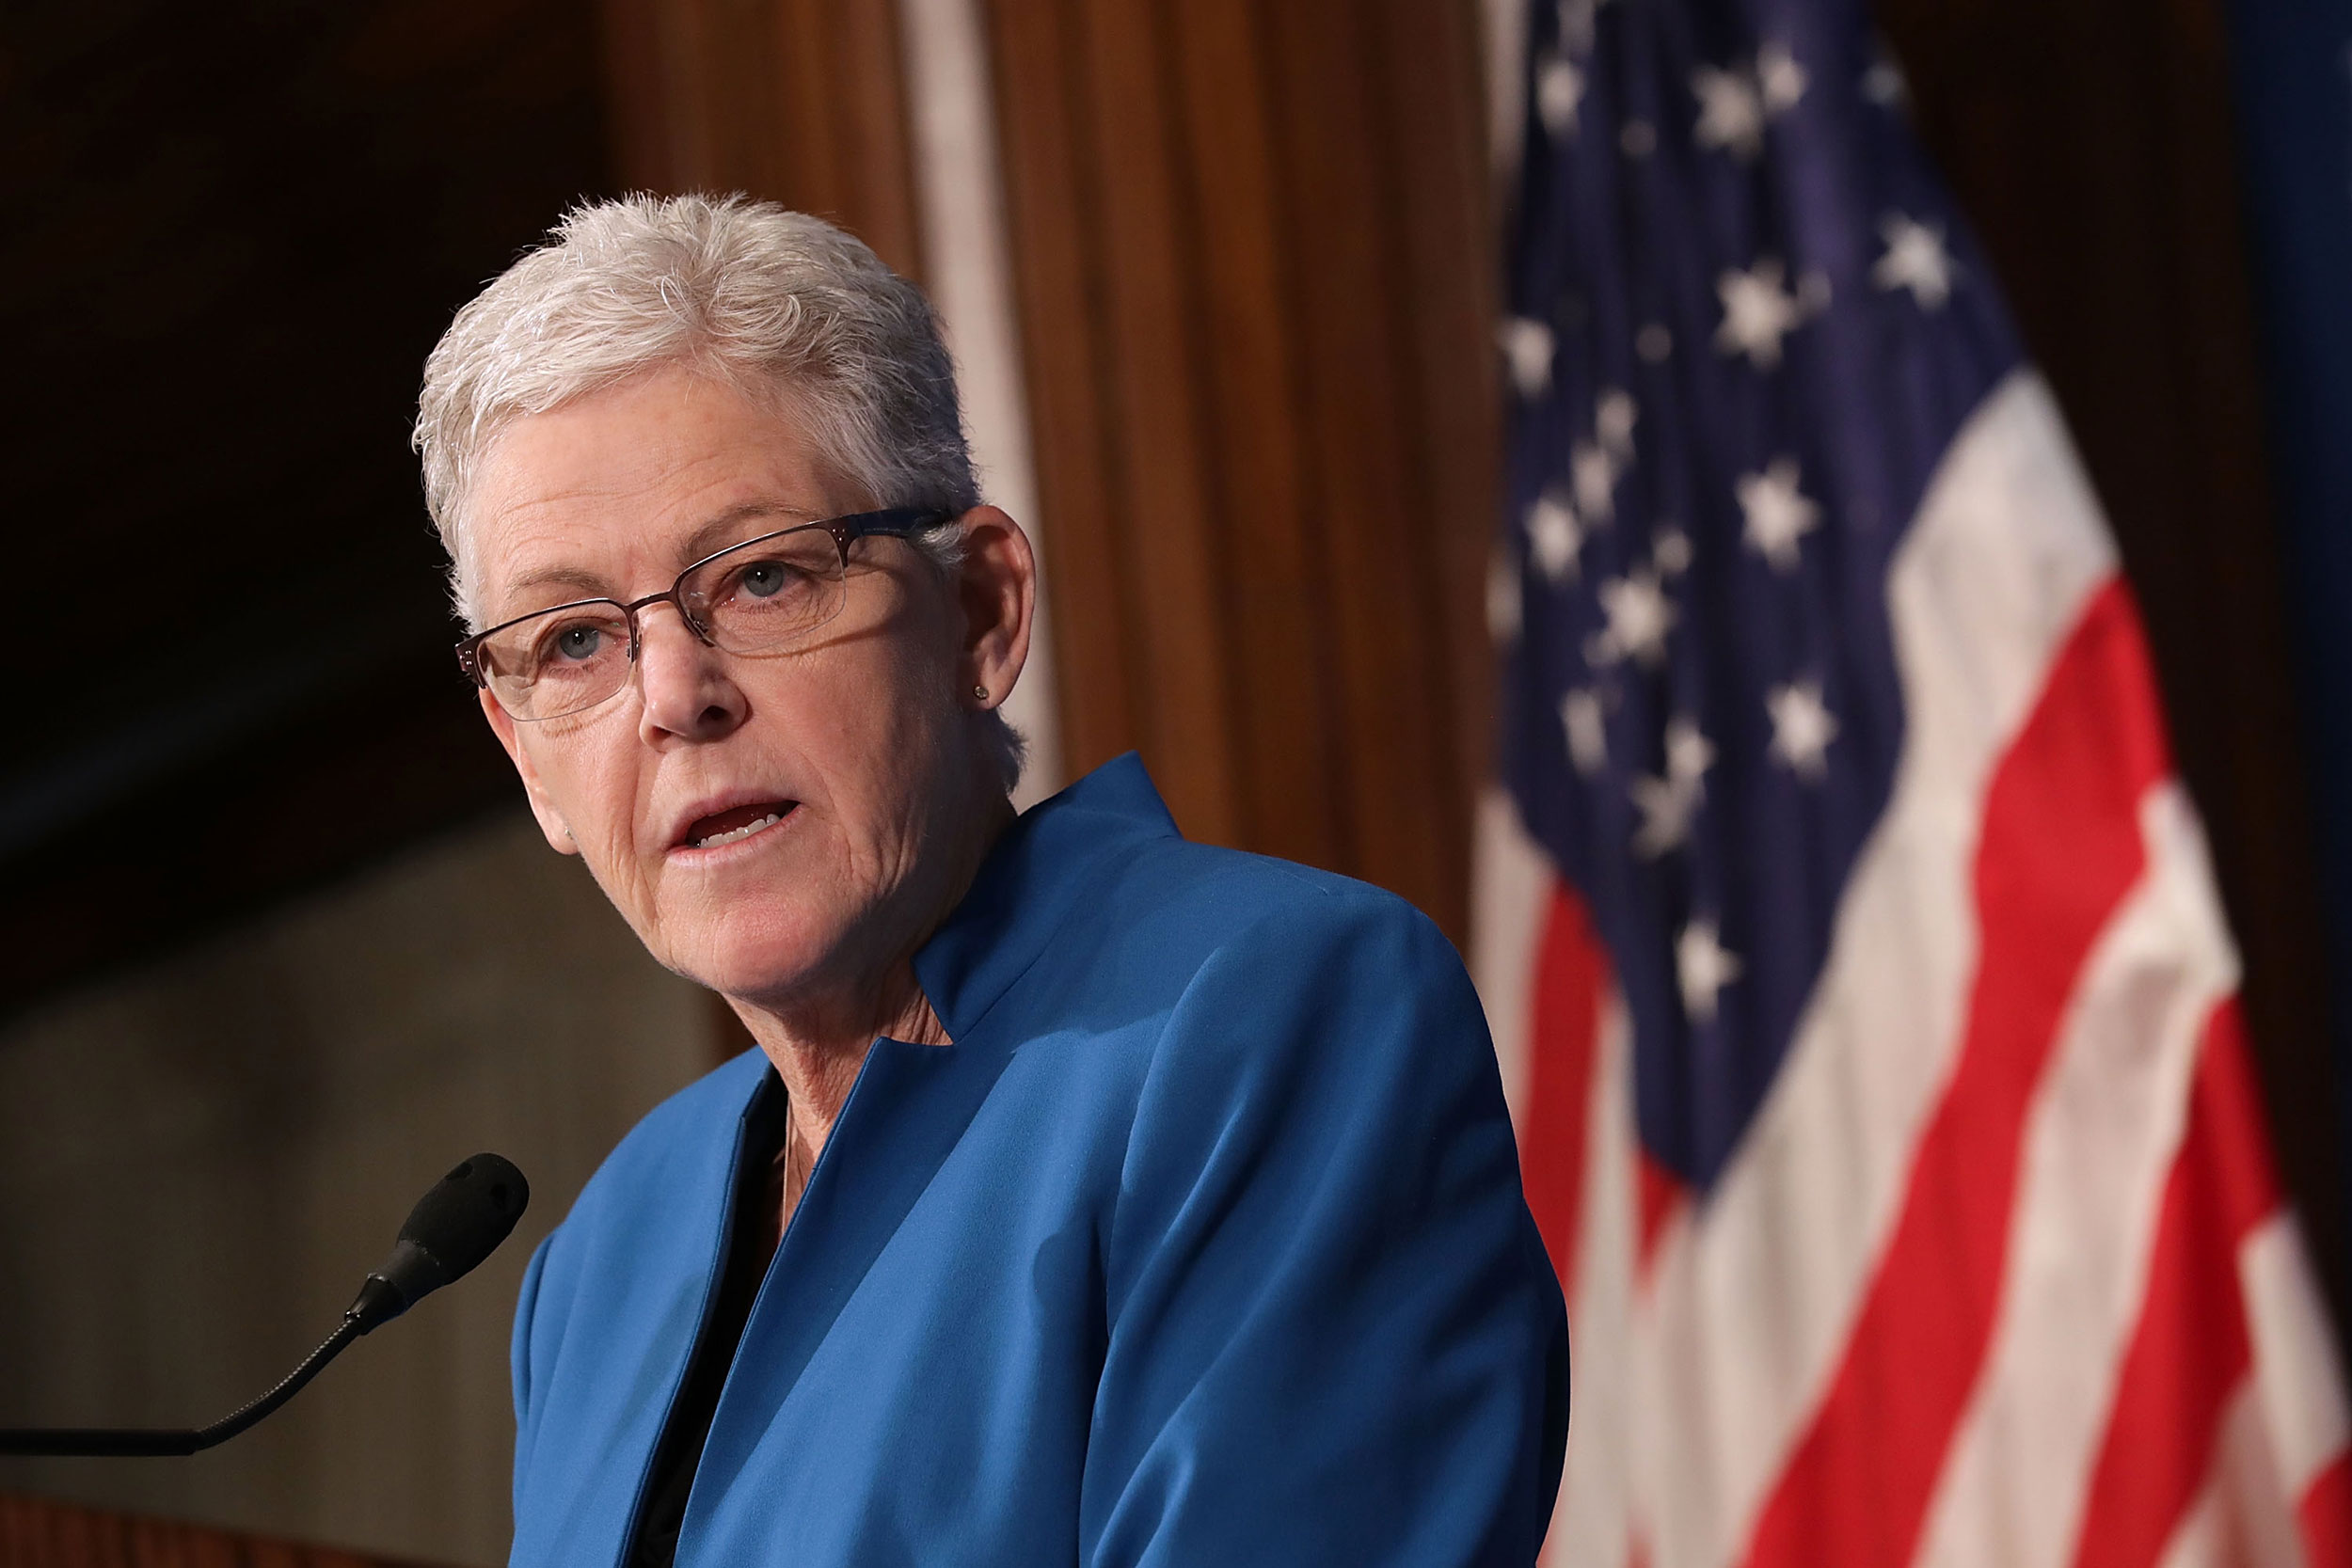 Gina McCarthy served as the administrator of the EPA from 2013 to 2017 under former President Barack Obama.